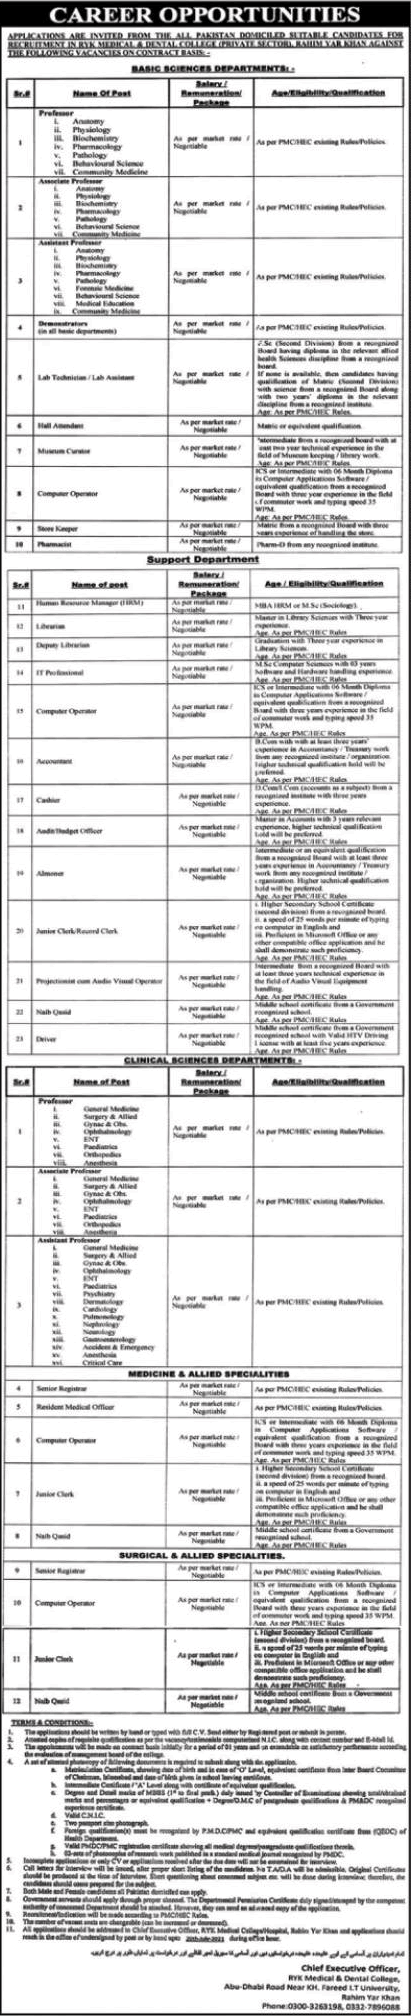 Rahim Yar Khan Medical and Dental College Jobs 2021 July Teaching Faculty & Others Latest